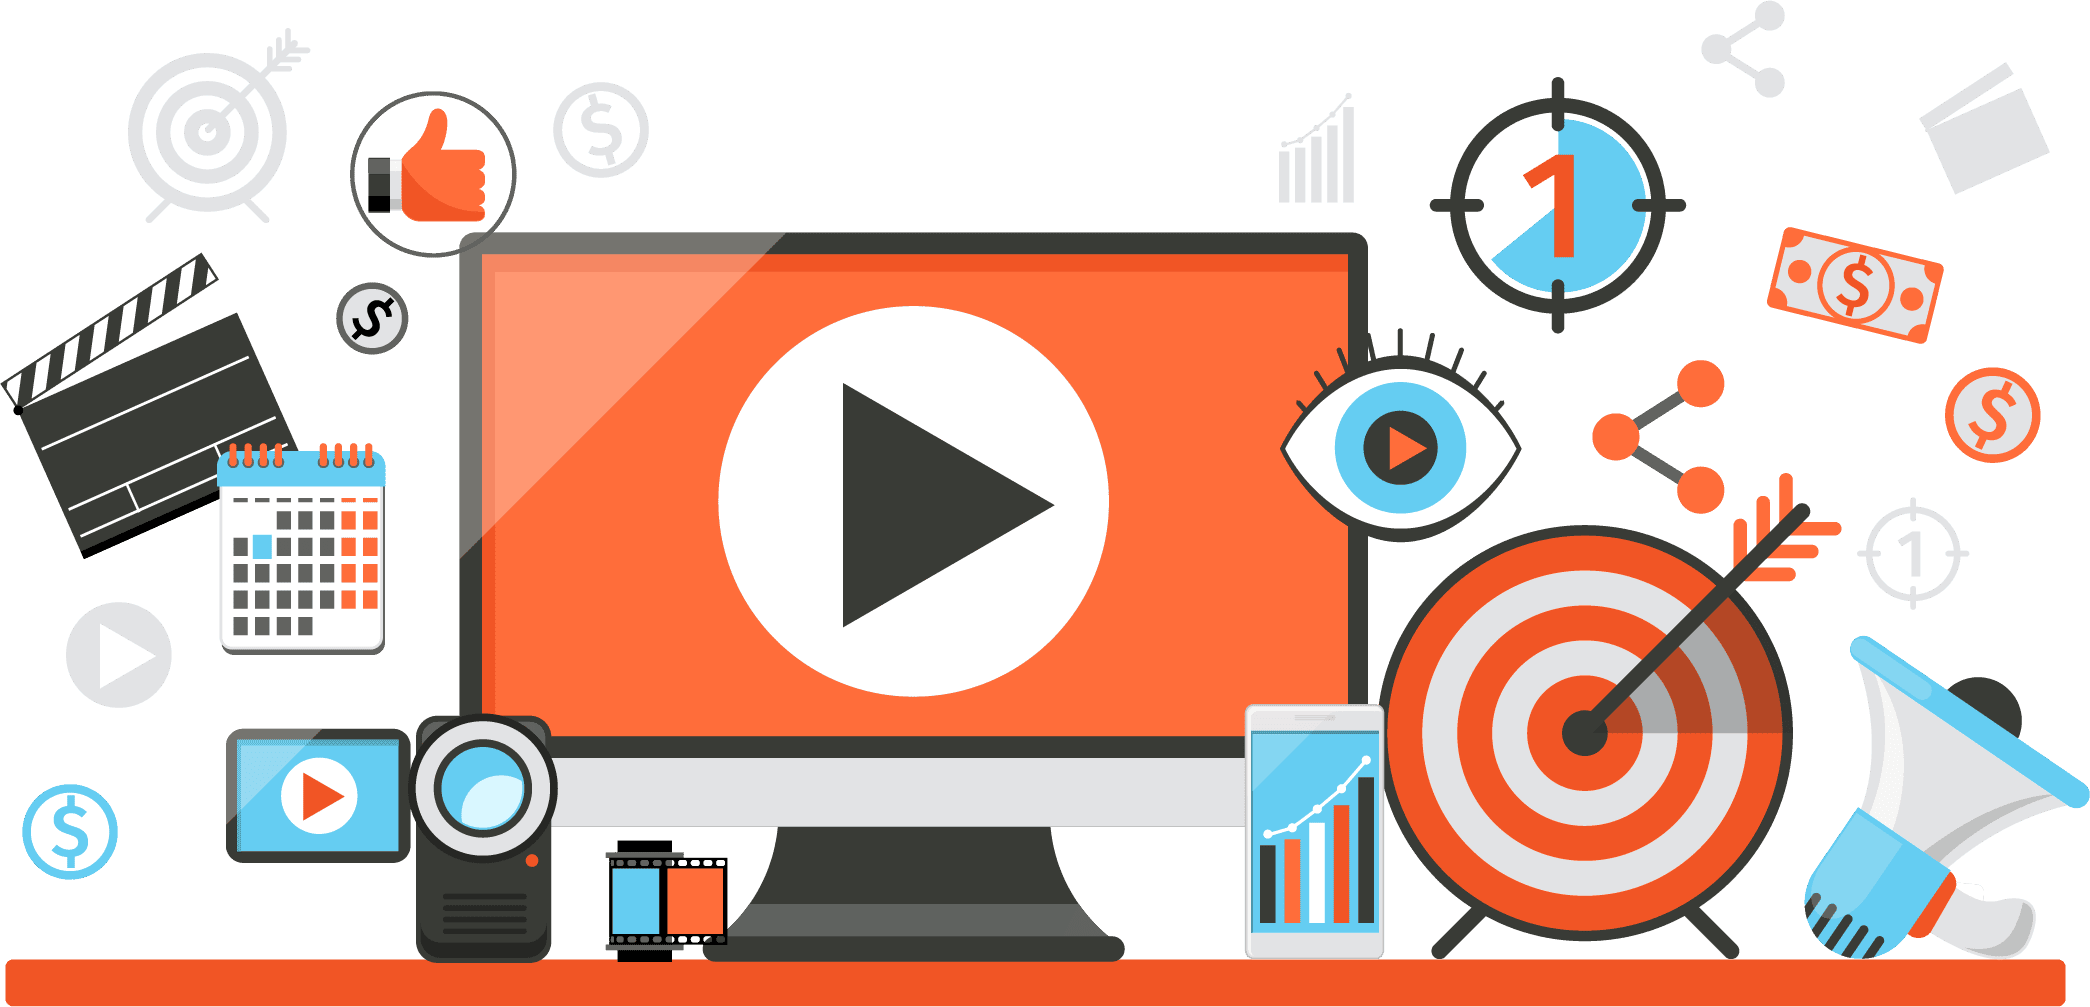 Youtube Video Marketing services